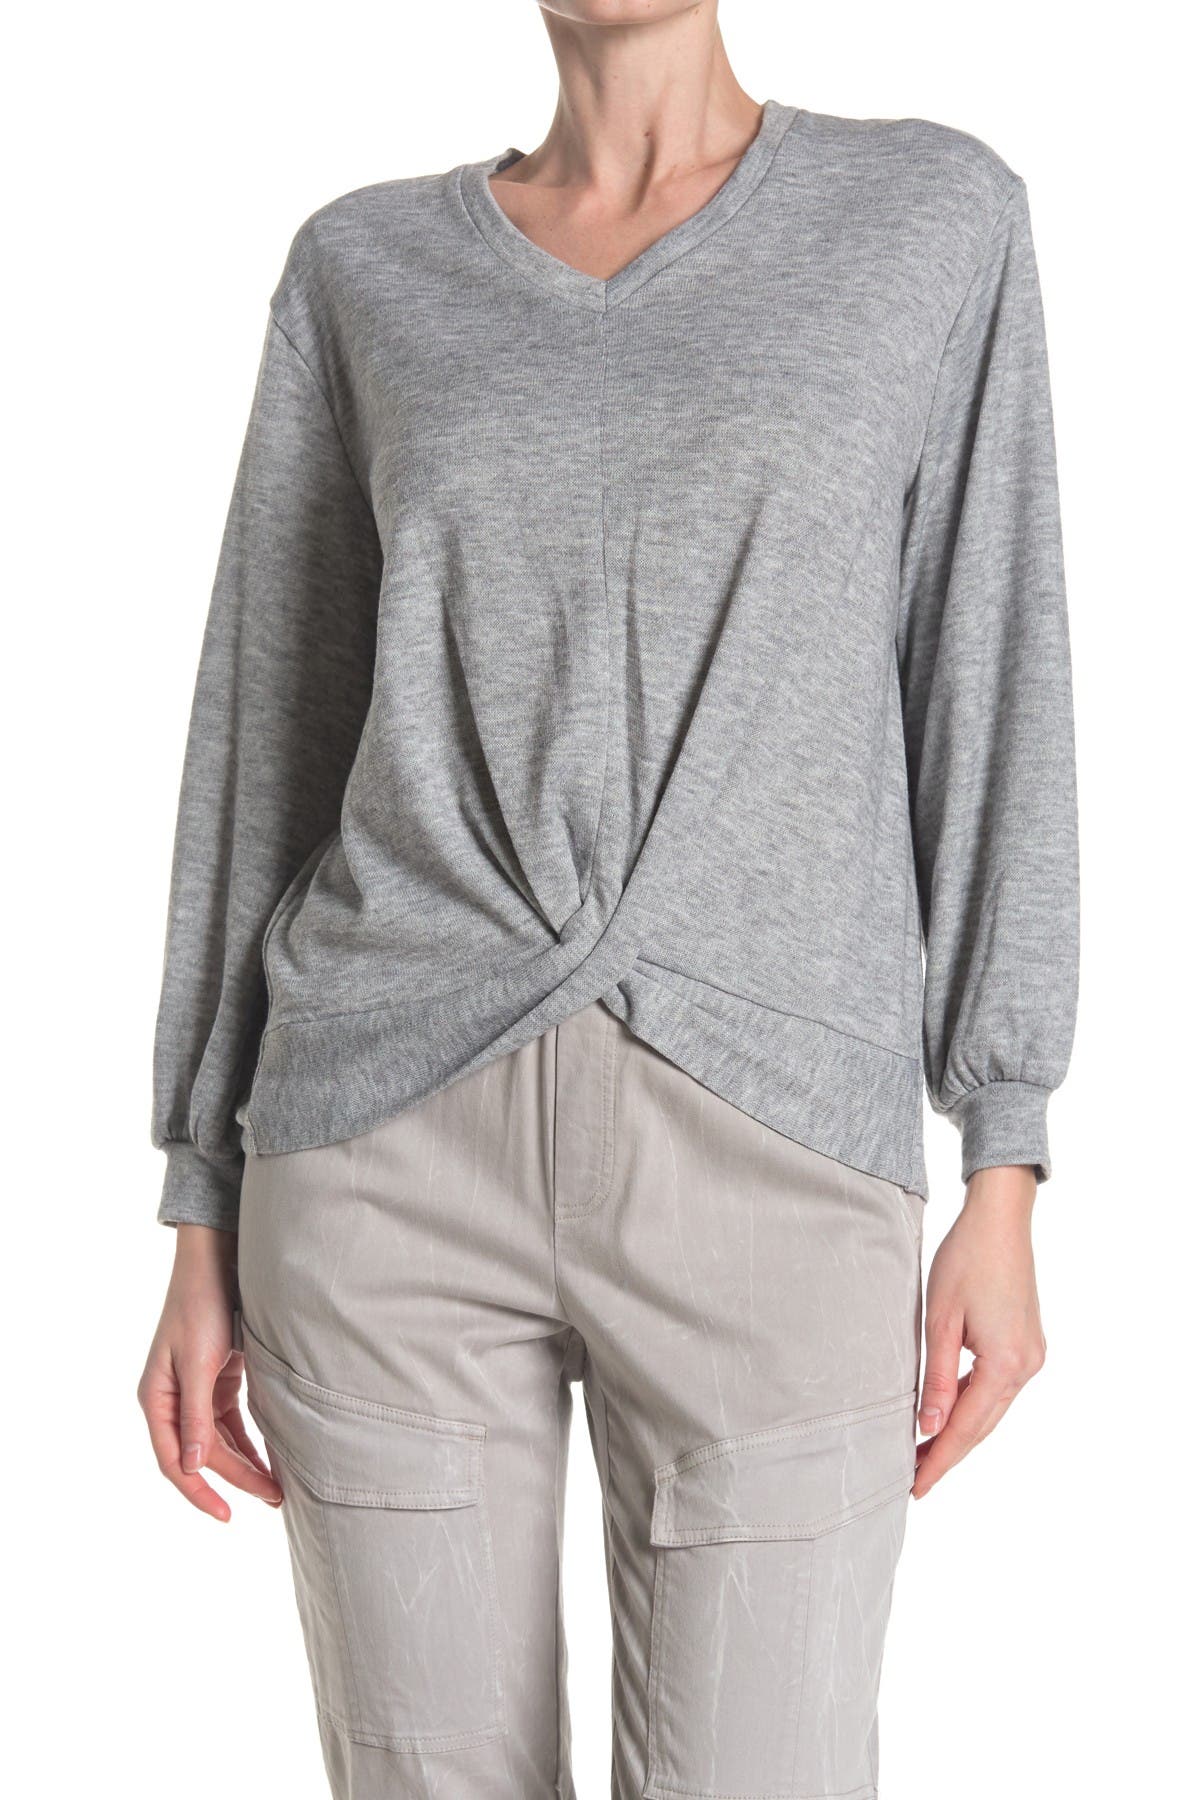 FOR THE REPUBLIC | Long Sleeve Twist Front V-Neck Top | Nordstrom Rack